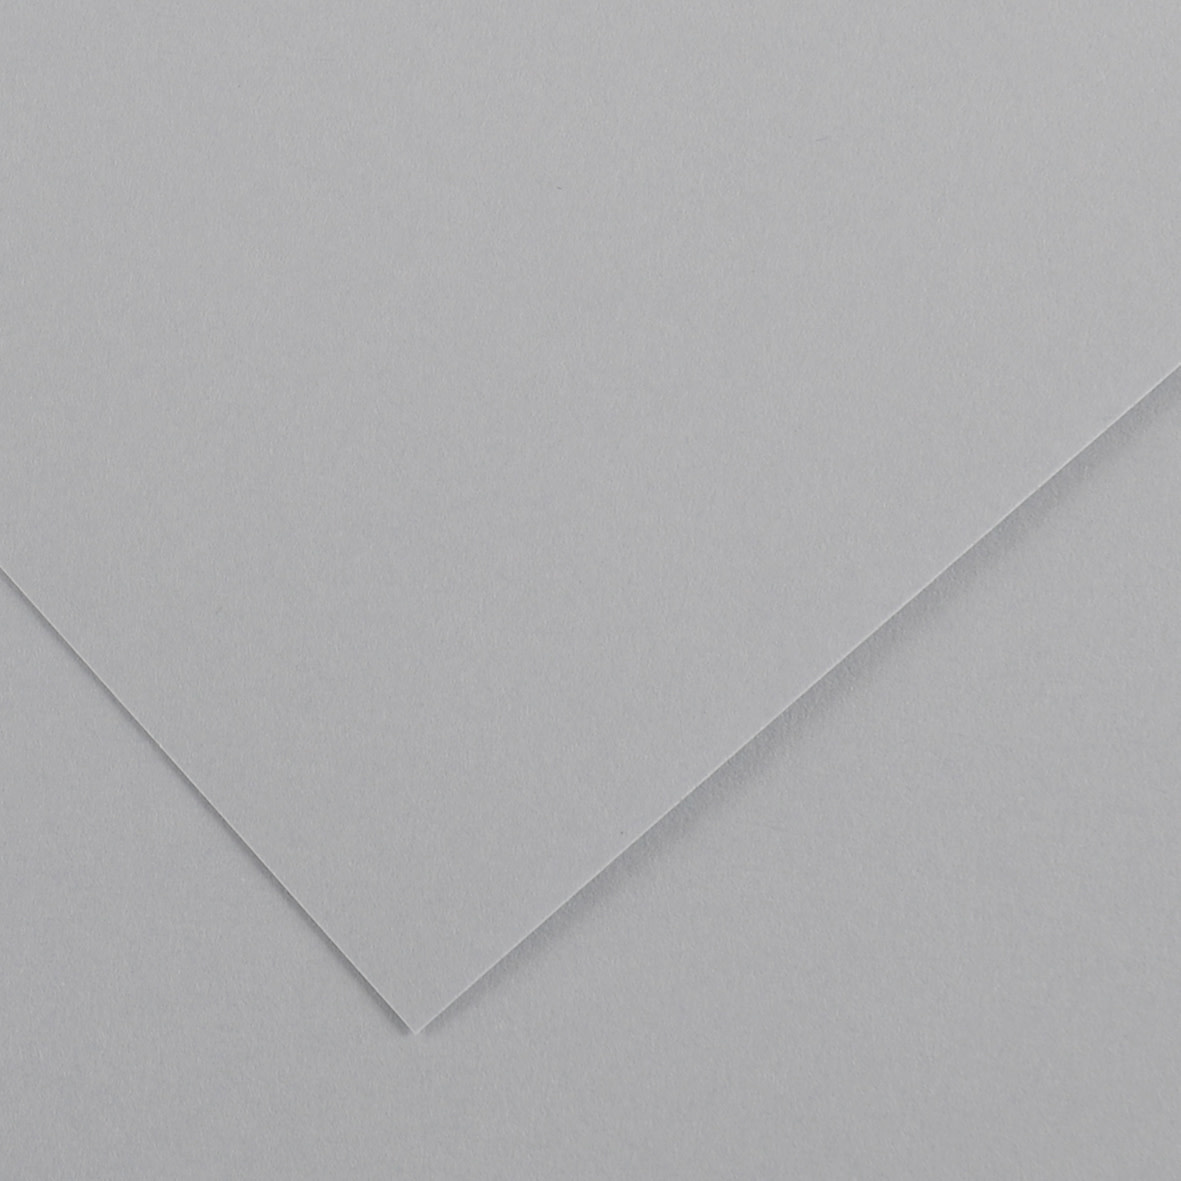 Colorline Heavyweight Paper Sheets Light Grey 300 GSM 19 in. x 25 in.